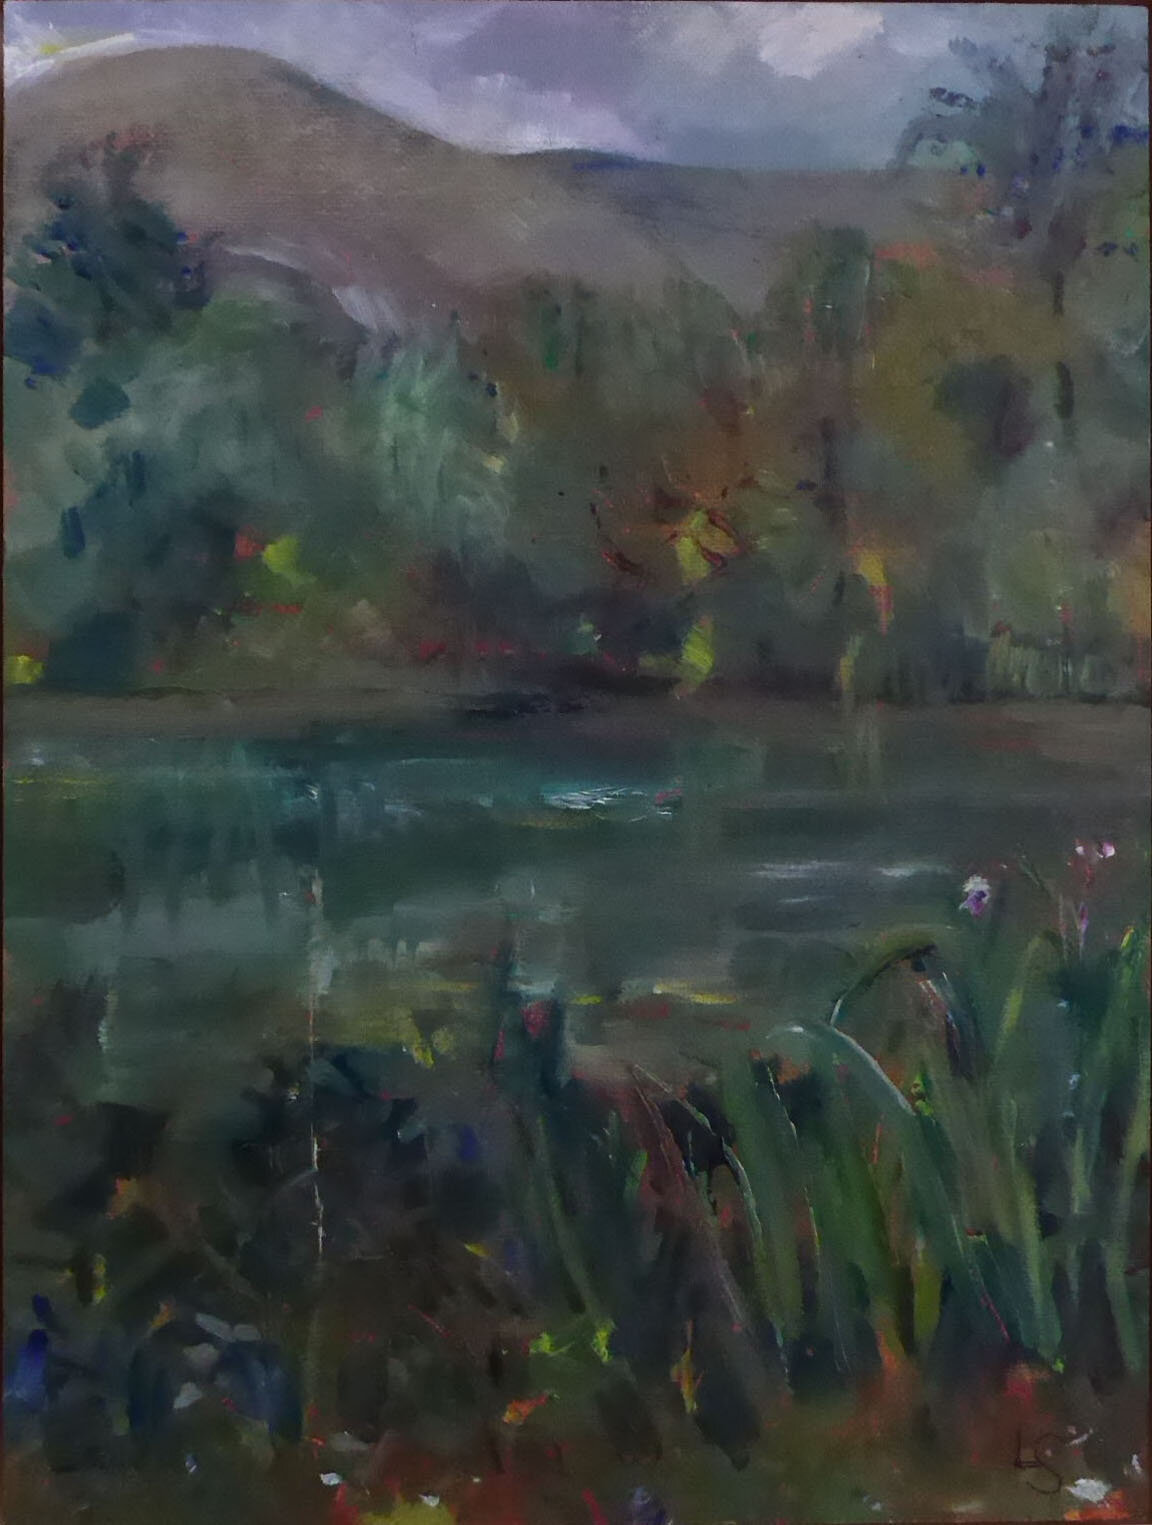 SOLD Linda Sheridan 05 - THE TRILLS OF LITTLE GREBES - HIGH POND, PENICUIK HOUSE - SOLD